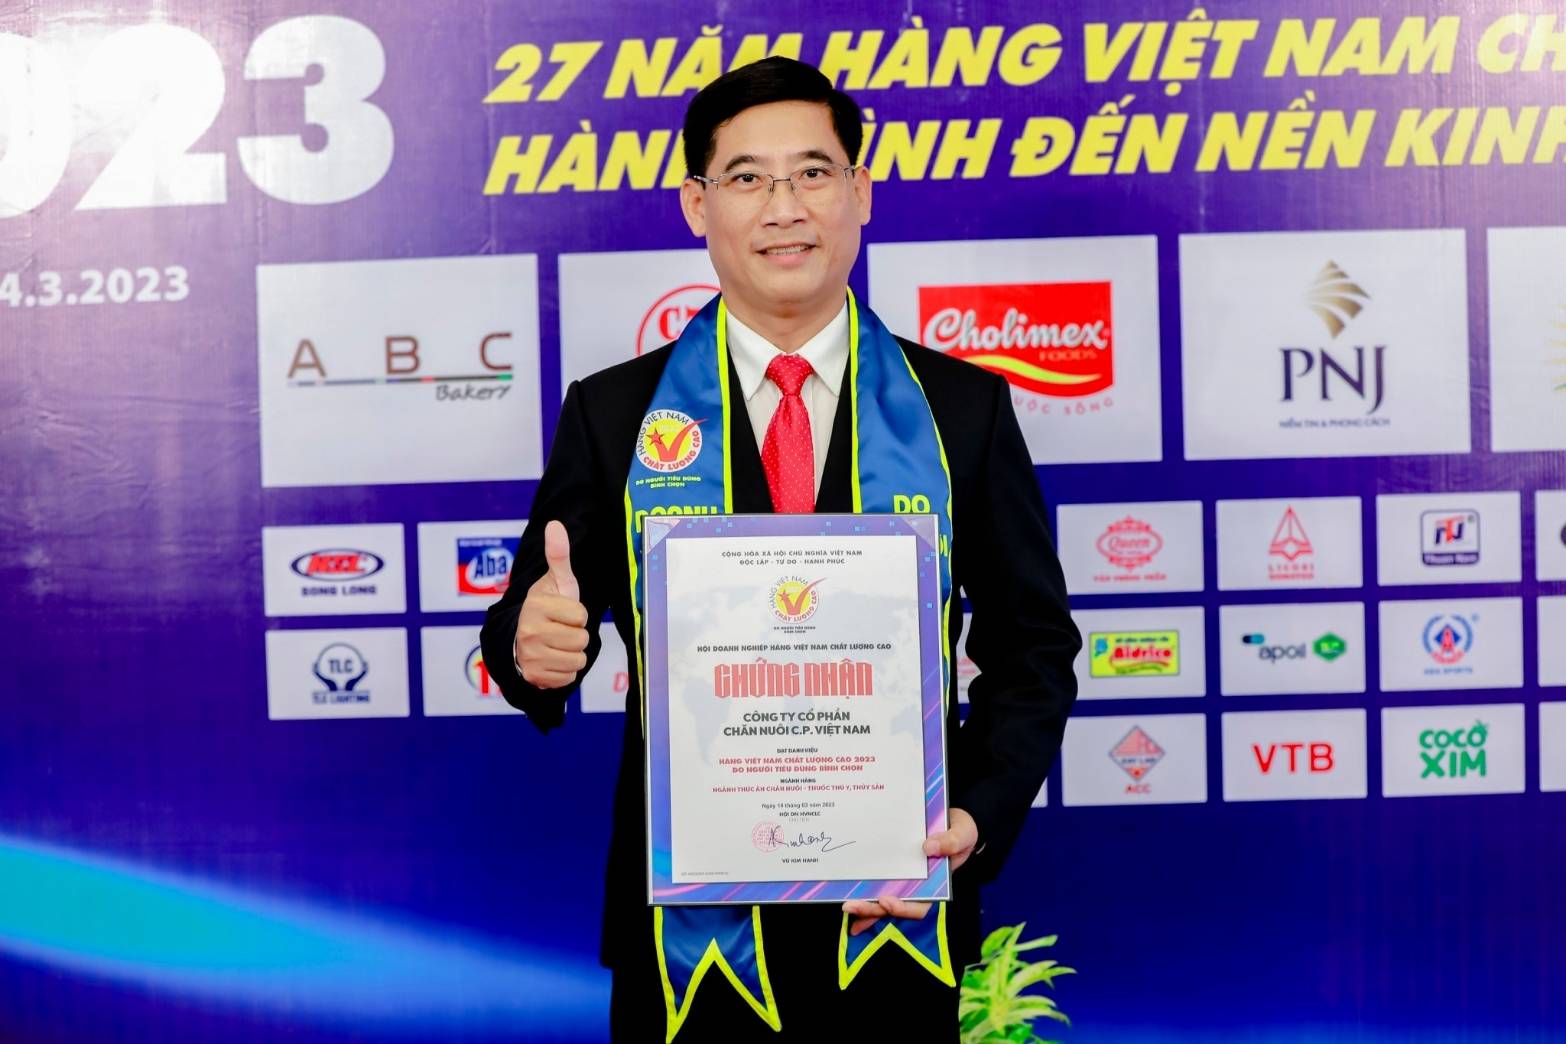 C.P. Vietnam Corporation Honored at High-Quality Vietnamese Goods Awards for Trusted, High-Quality Products